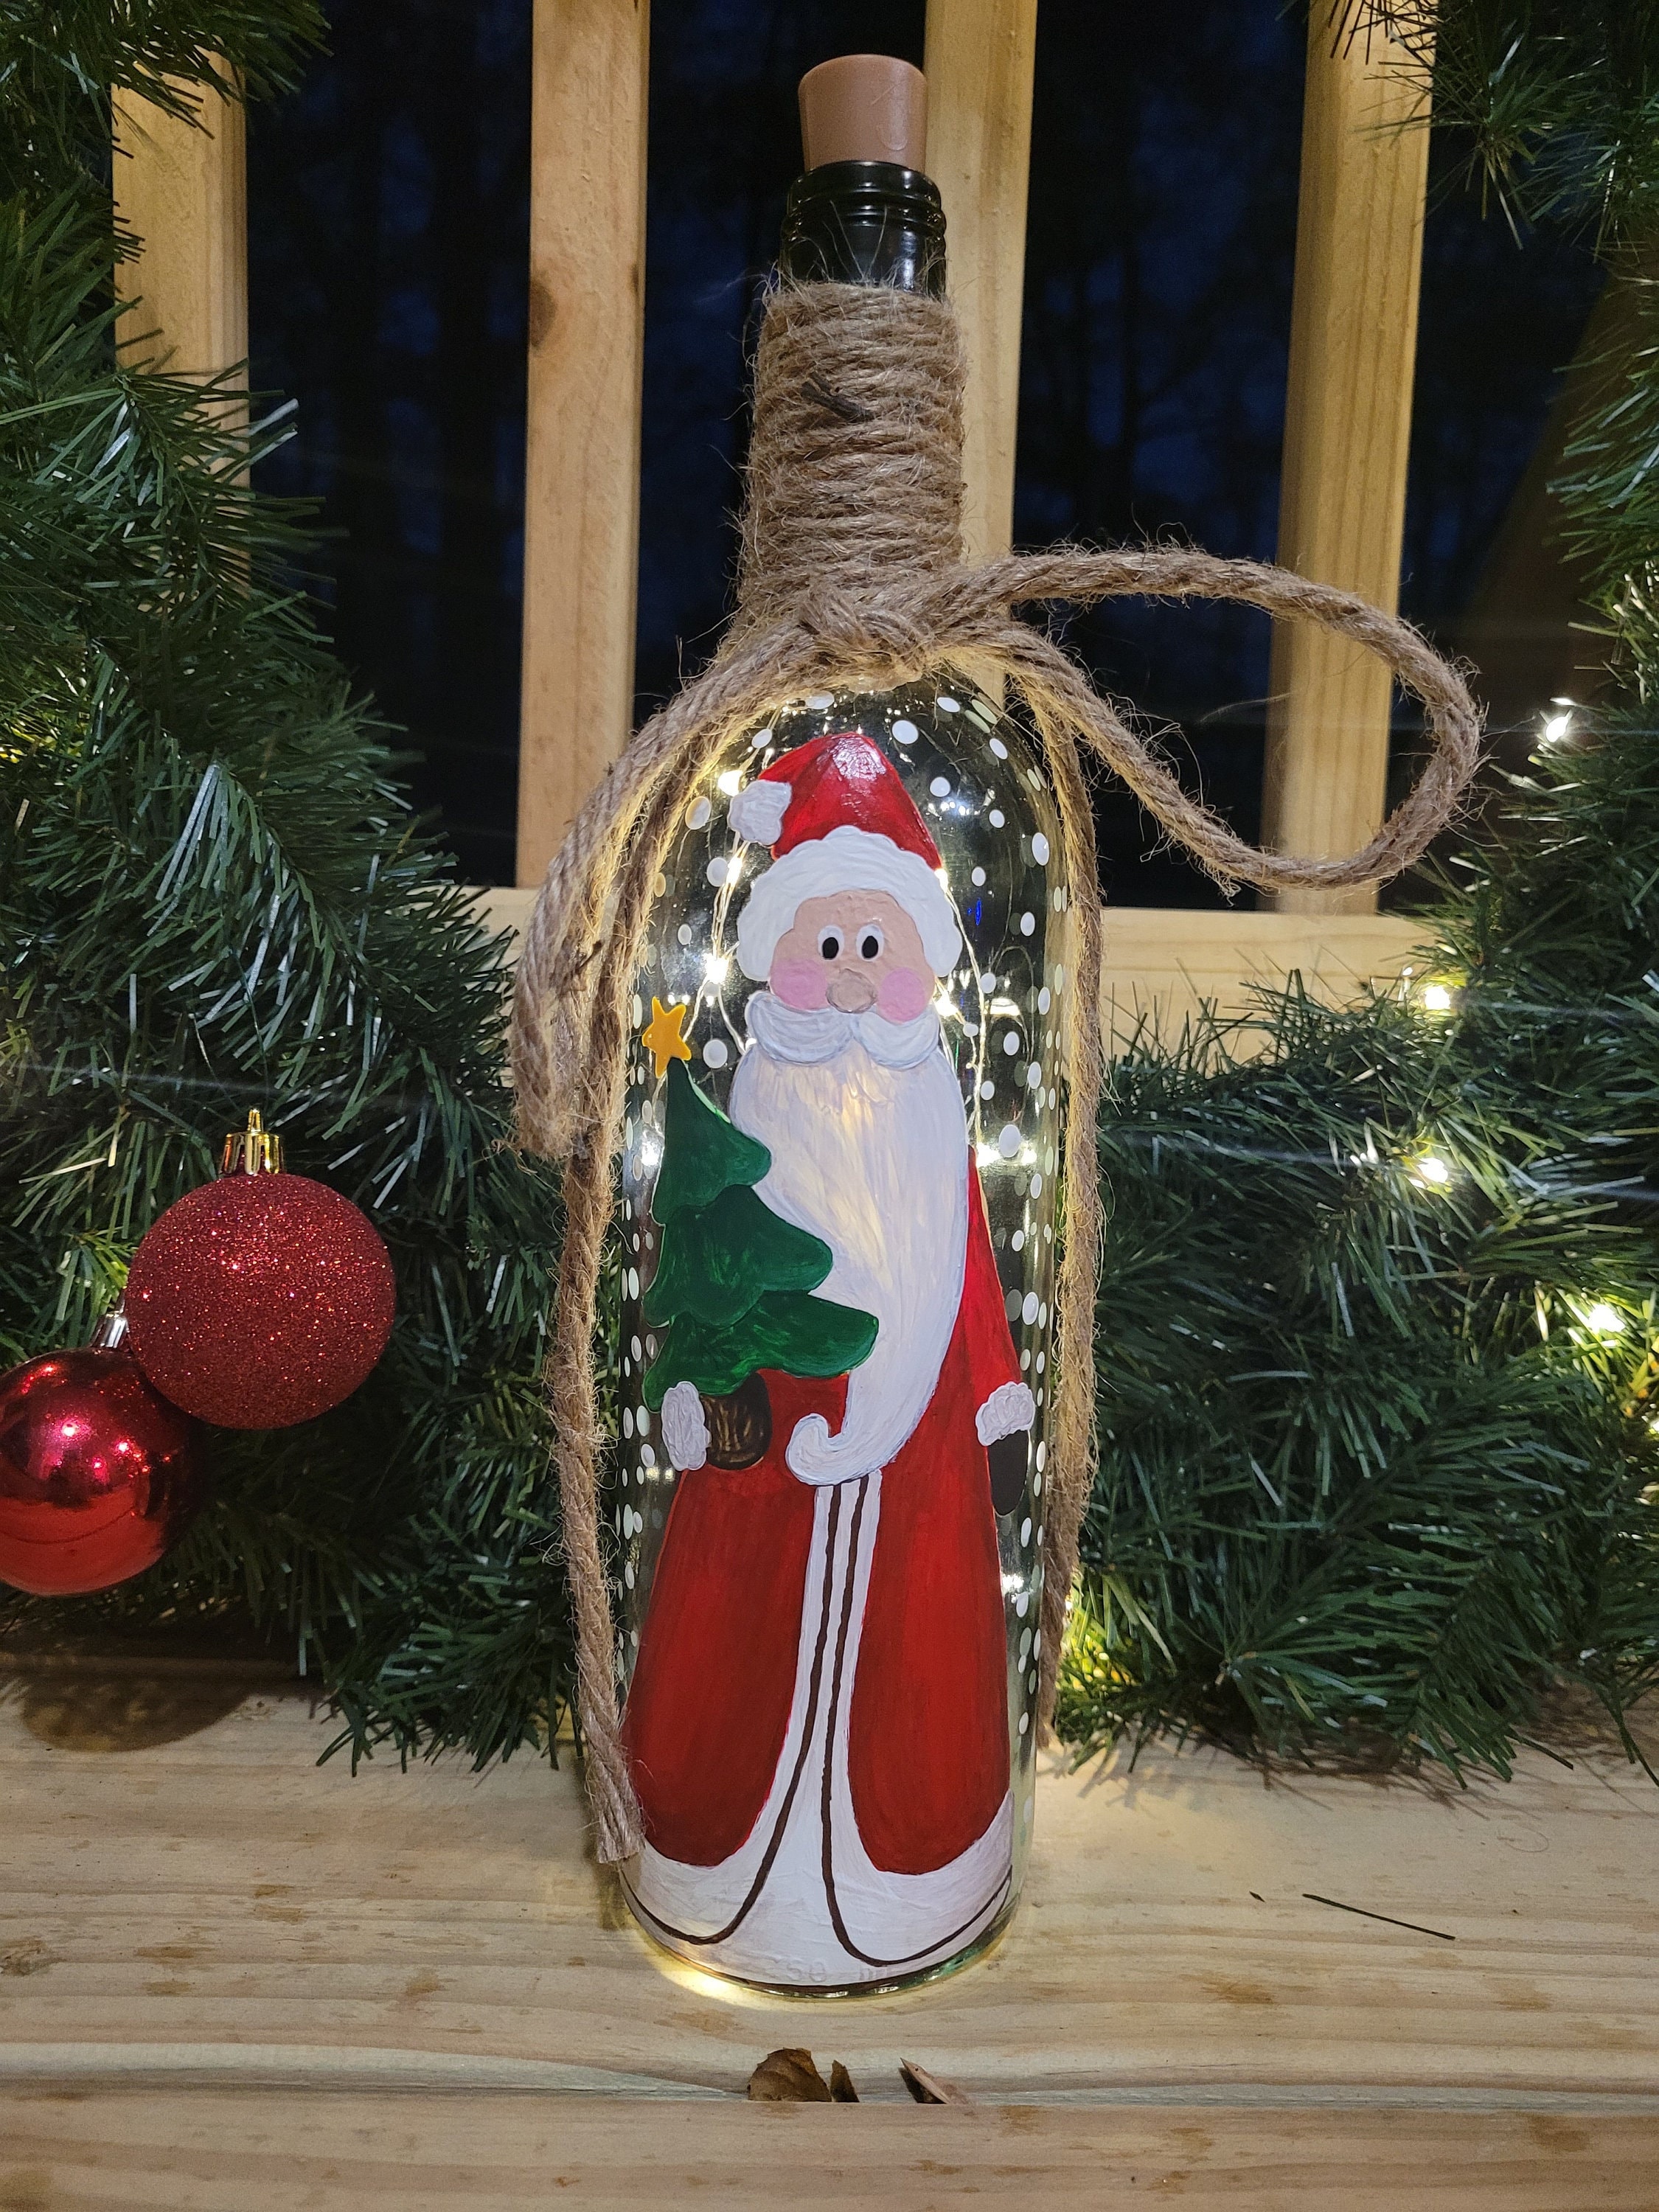 Hand Painted Xmas Bottle with Winter Scene